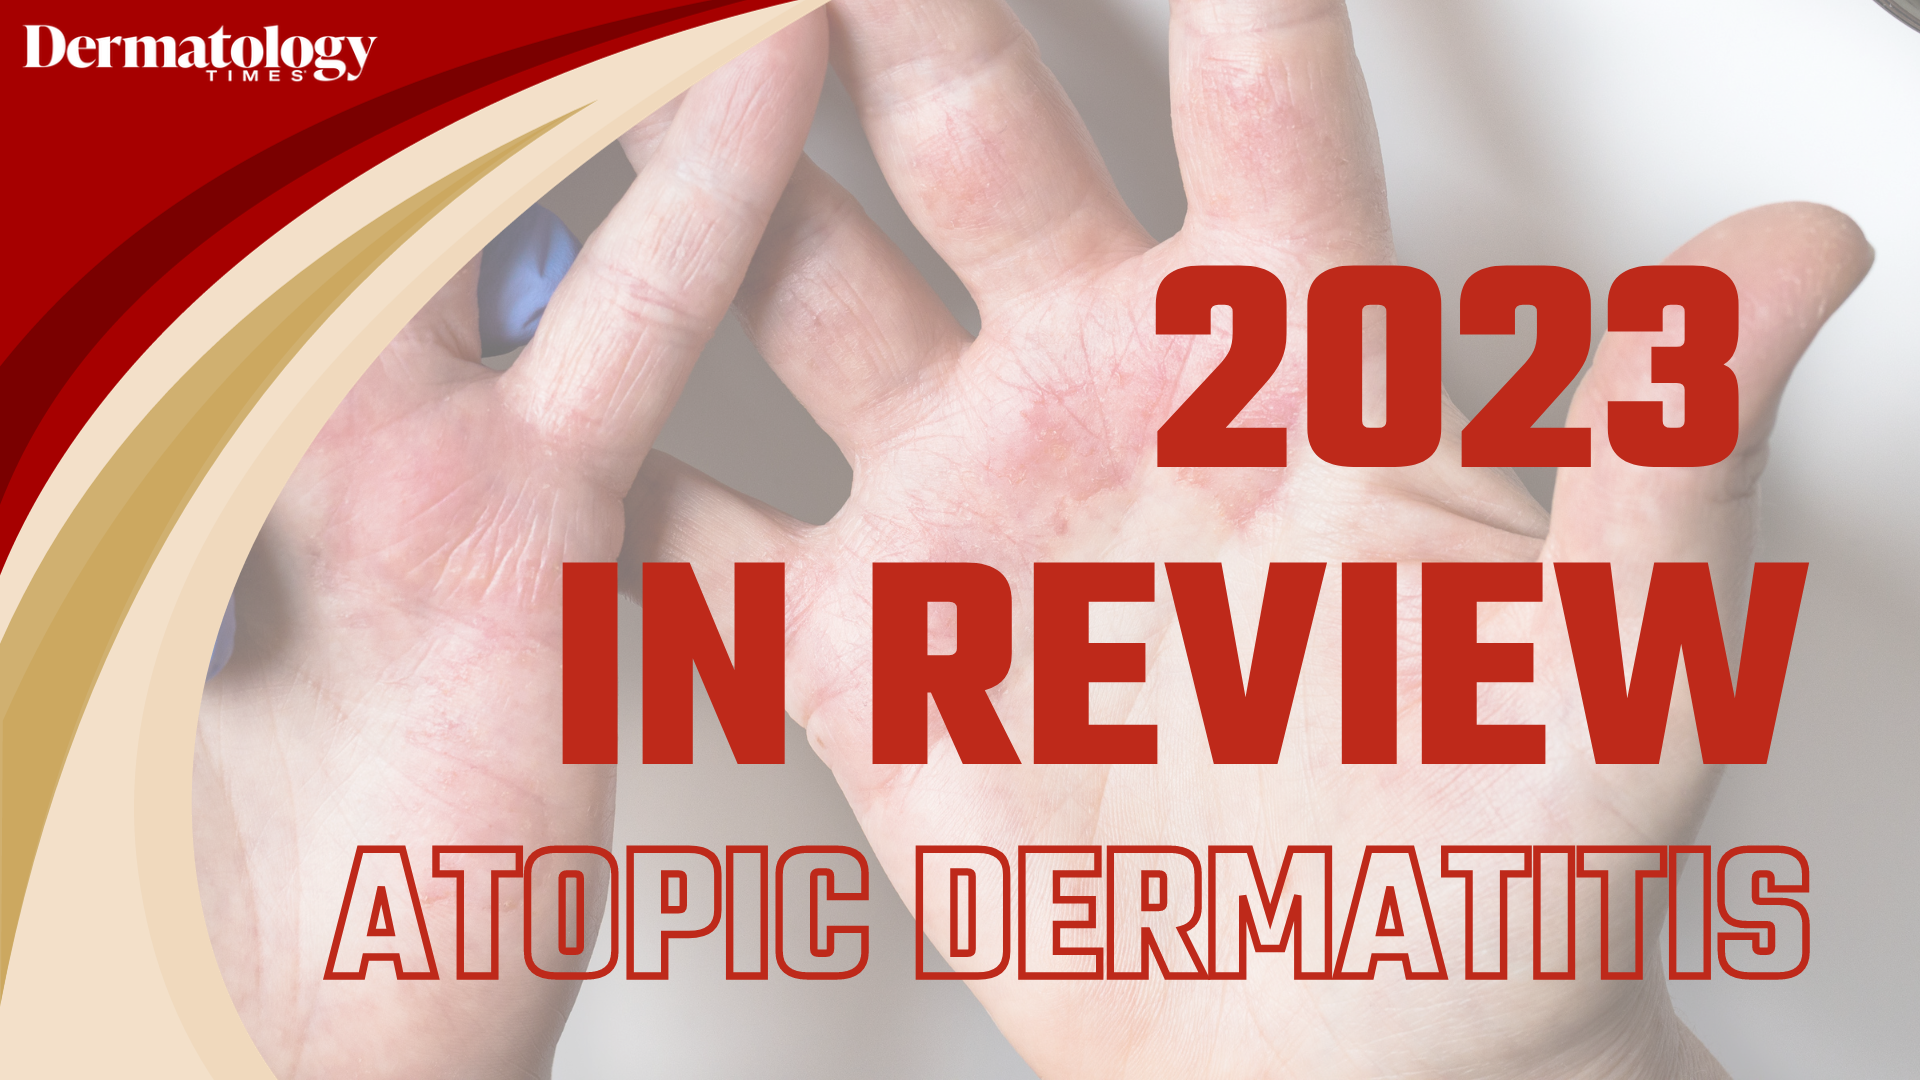 Dermatology Times 2023 In Review: Atopic Dermatitis